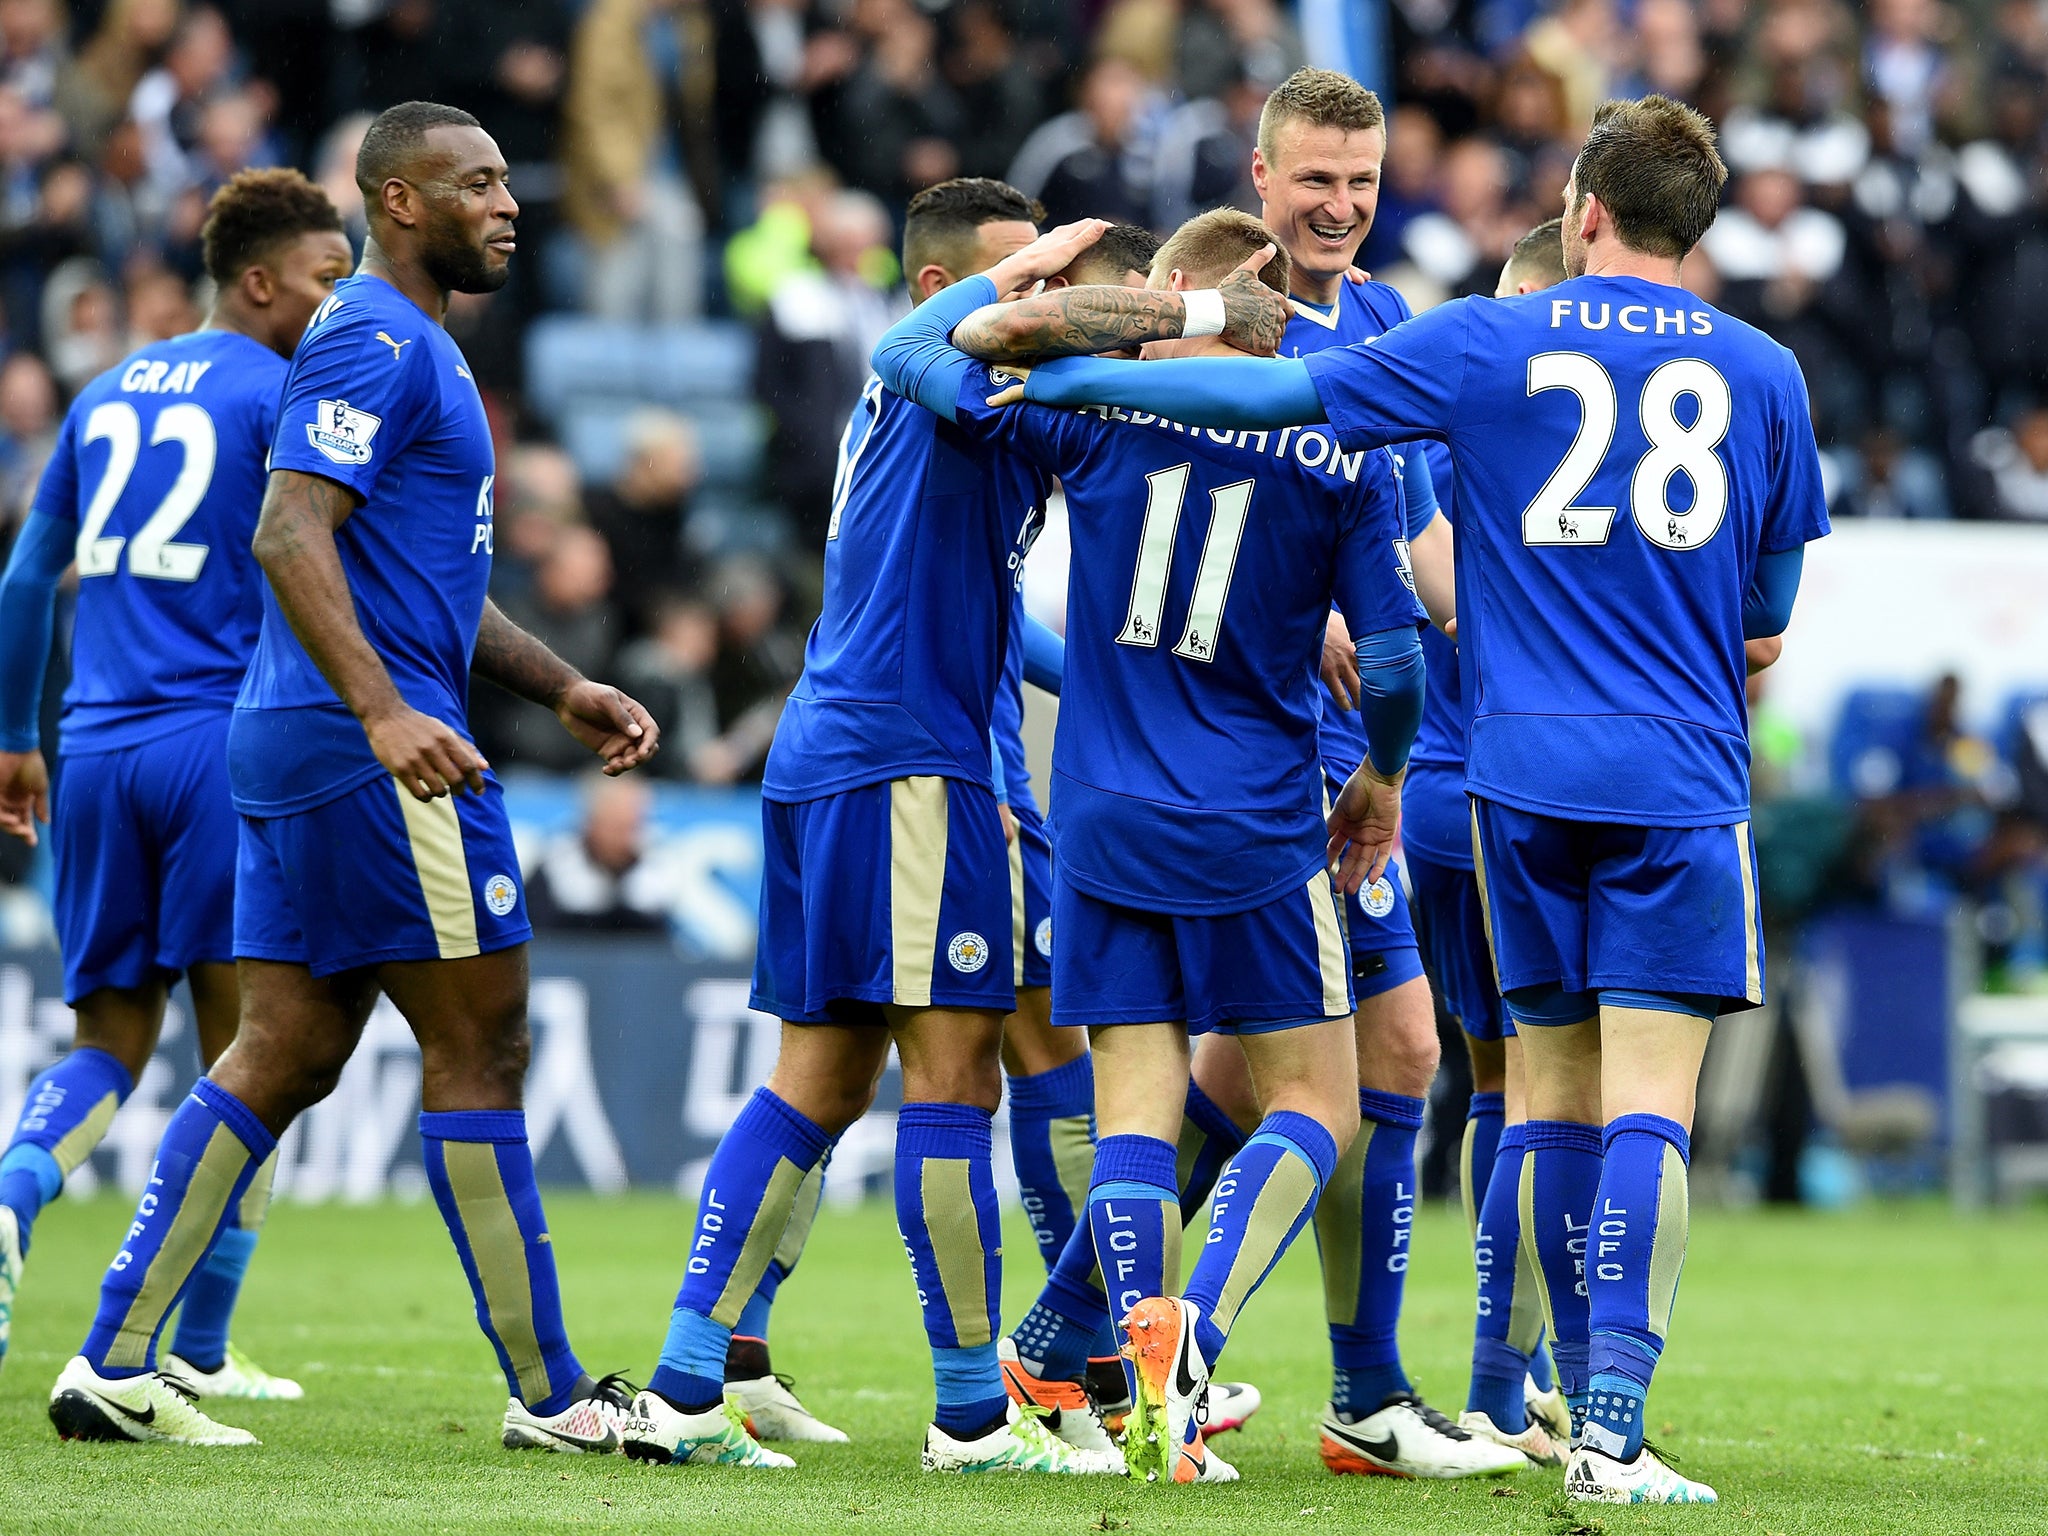 Gary Lineker has been mightily impressed by Leicester's team spirit